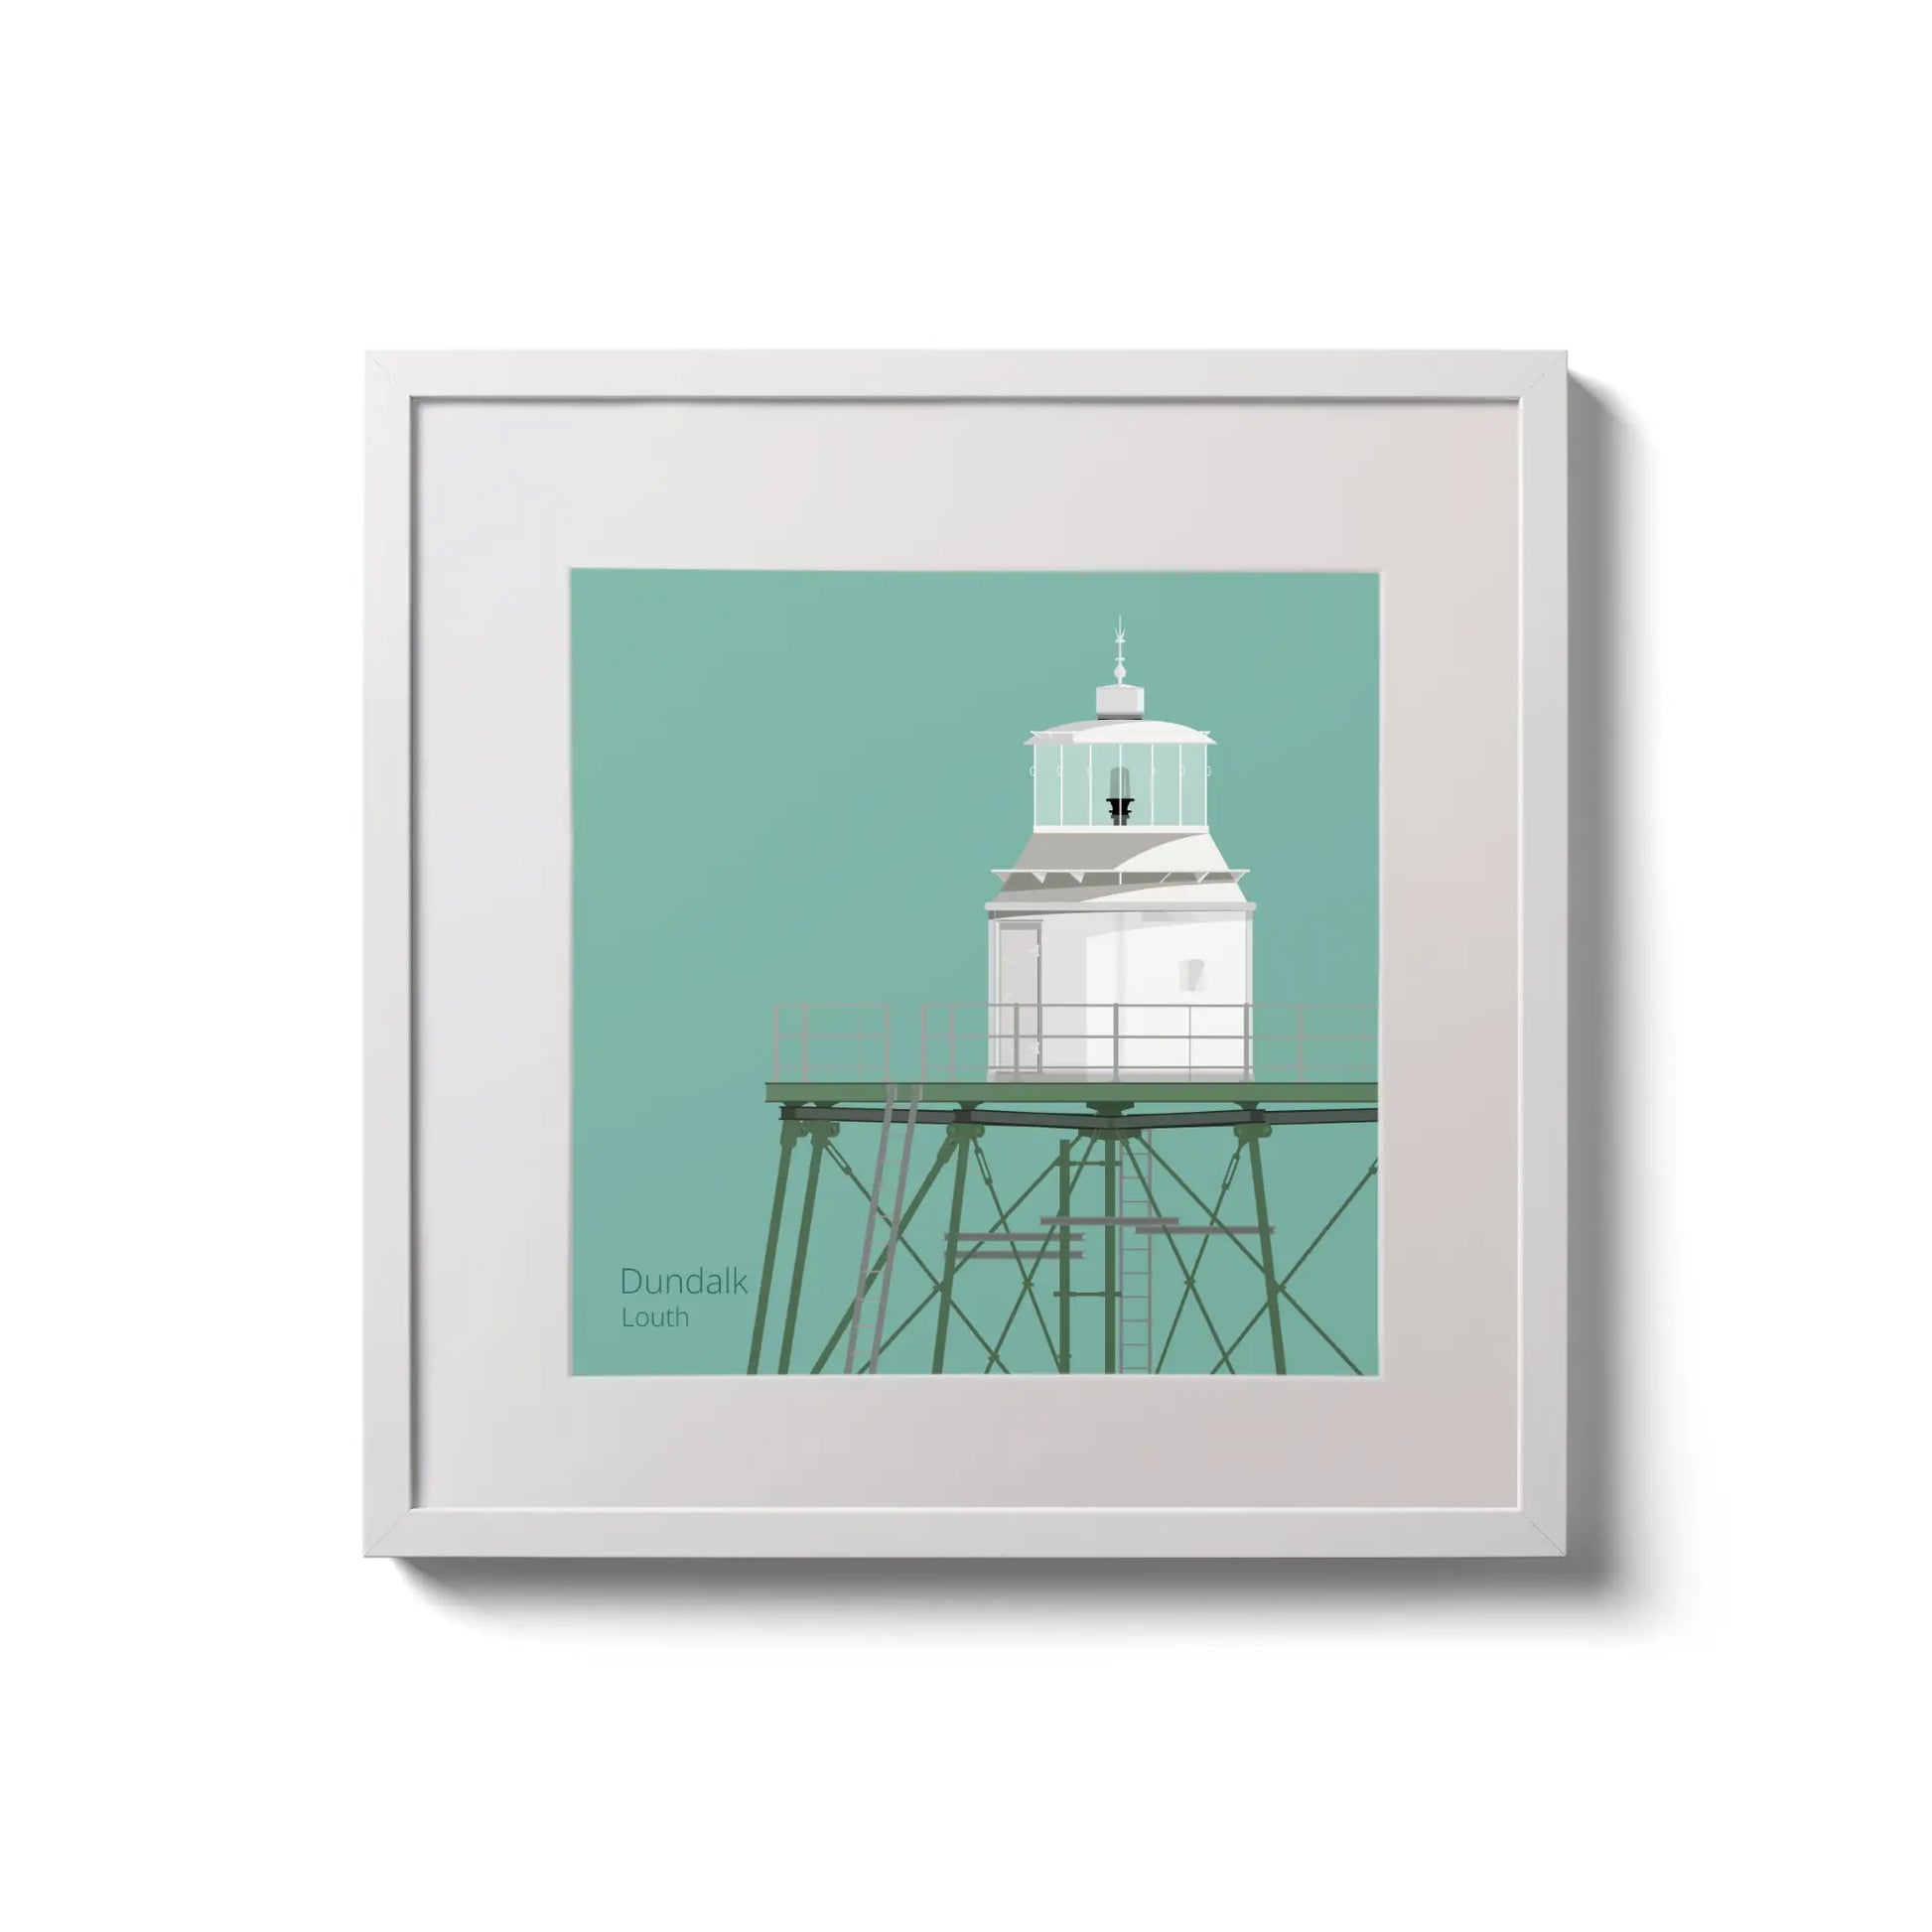 Contemporary wall hanging  Dundalk lighthouse on an ocean green background,  in a white square frame measuring 20x20cm.